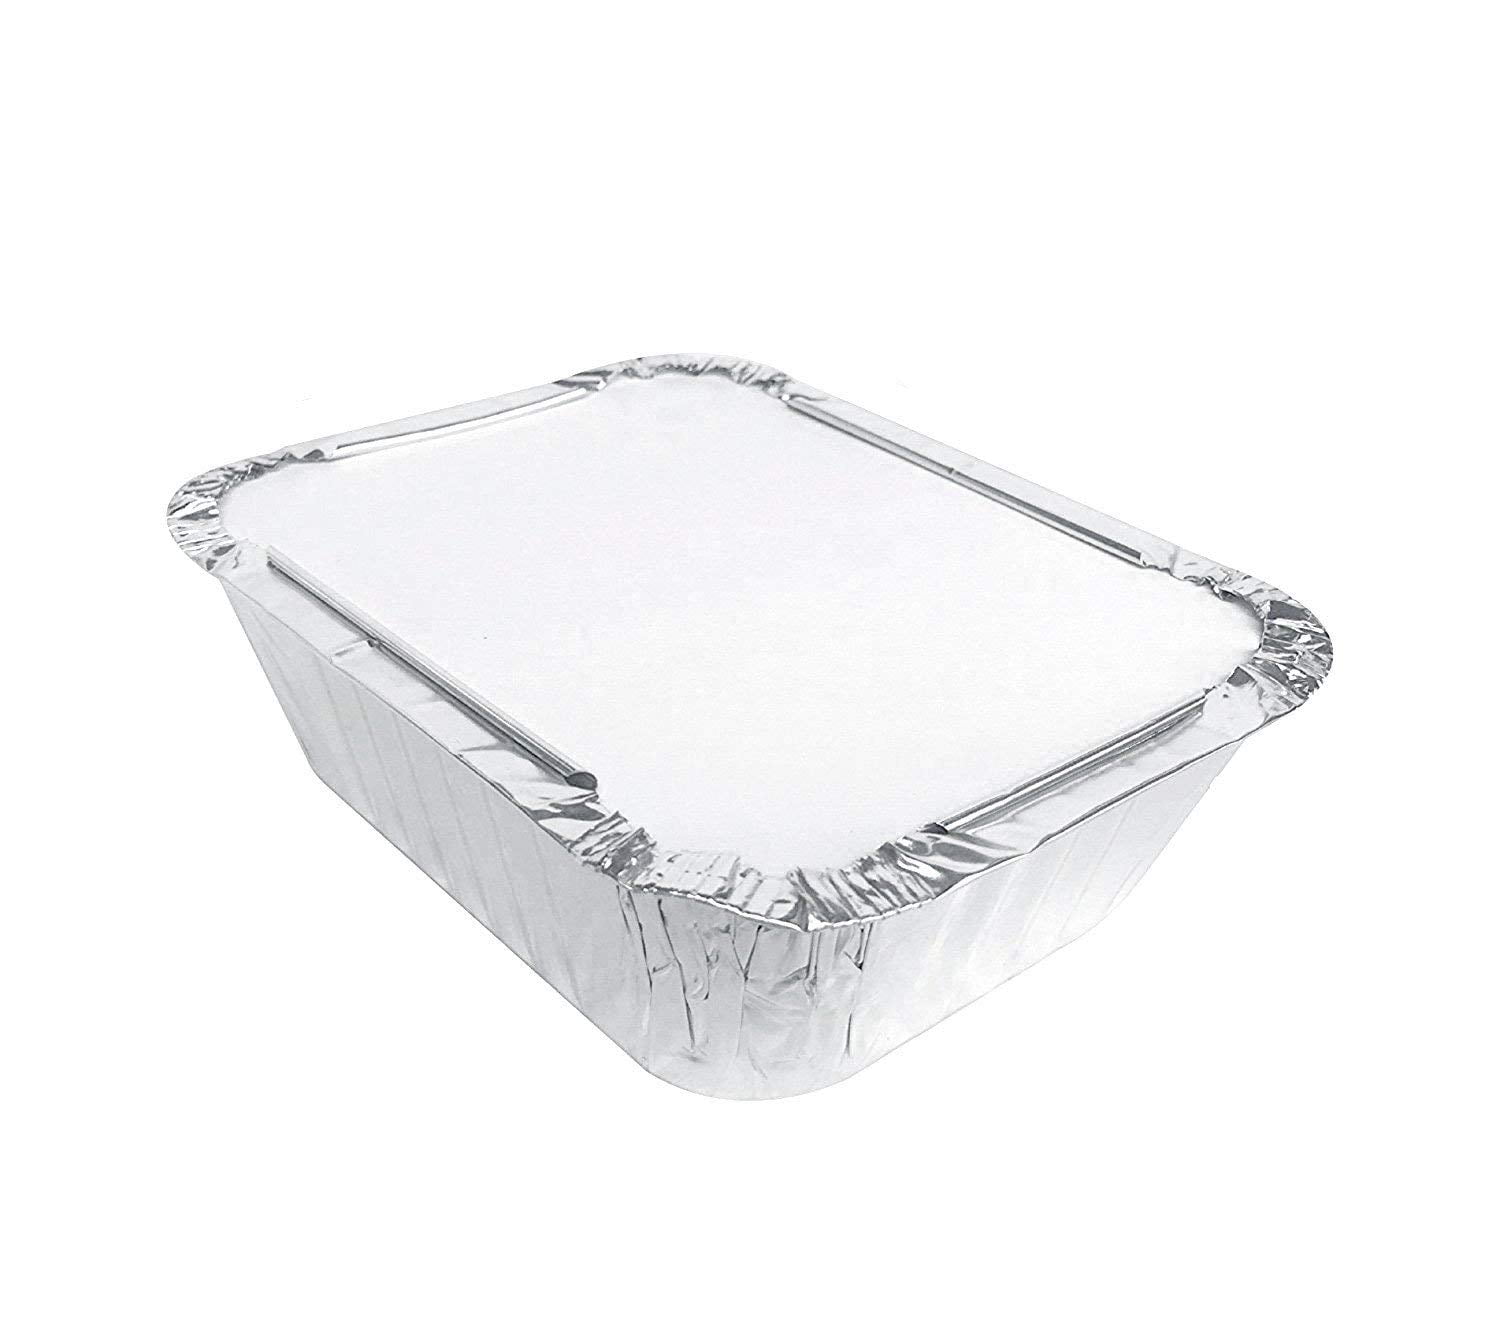 Diplastible Oblong Disposable Aluminum Pans with Lids - 10 Pack - 8.5 x 6 x  2.5 in 5-lb Pan with Foil Covers Perfect for Baking Cooking Food and